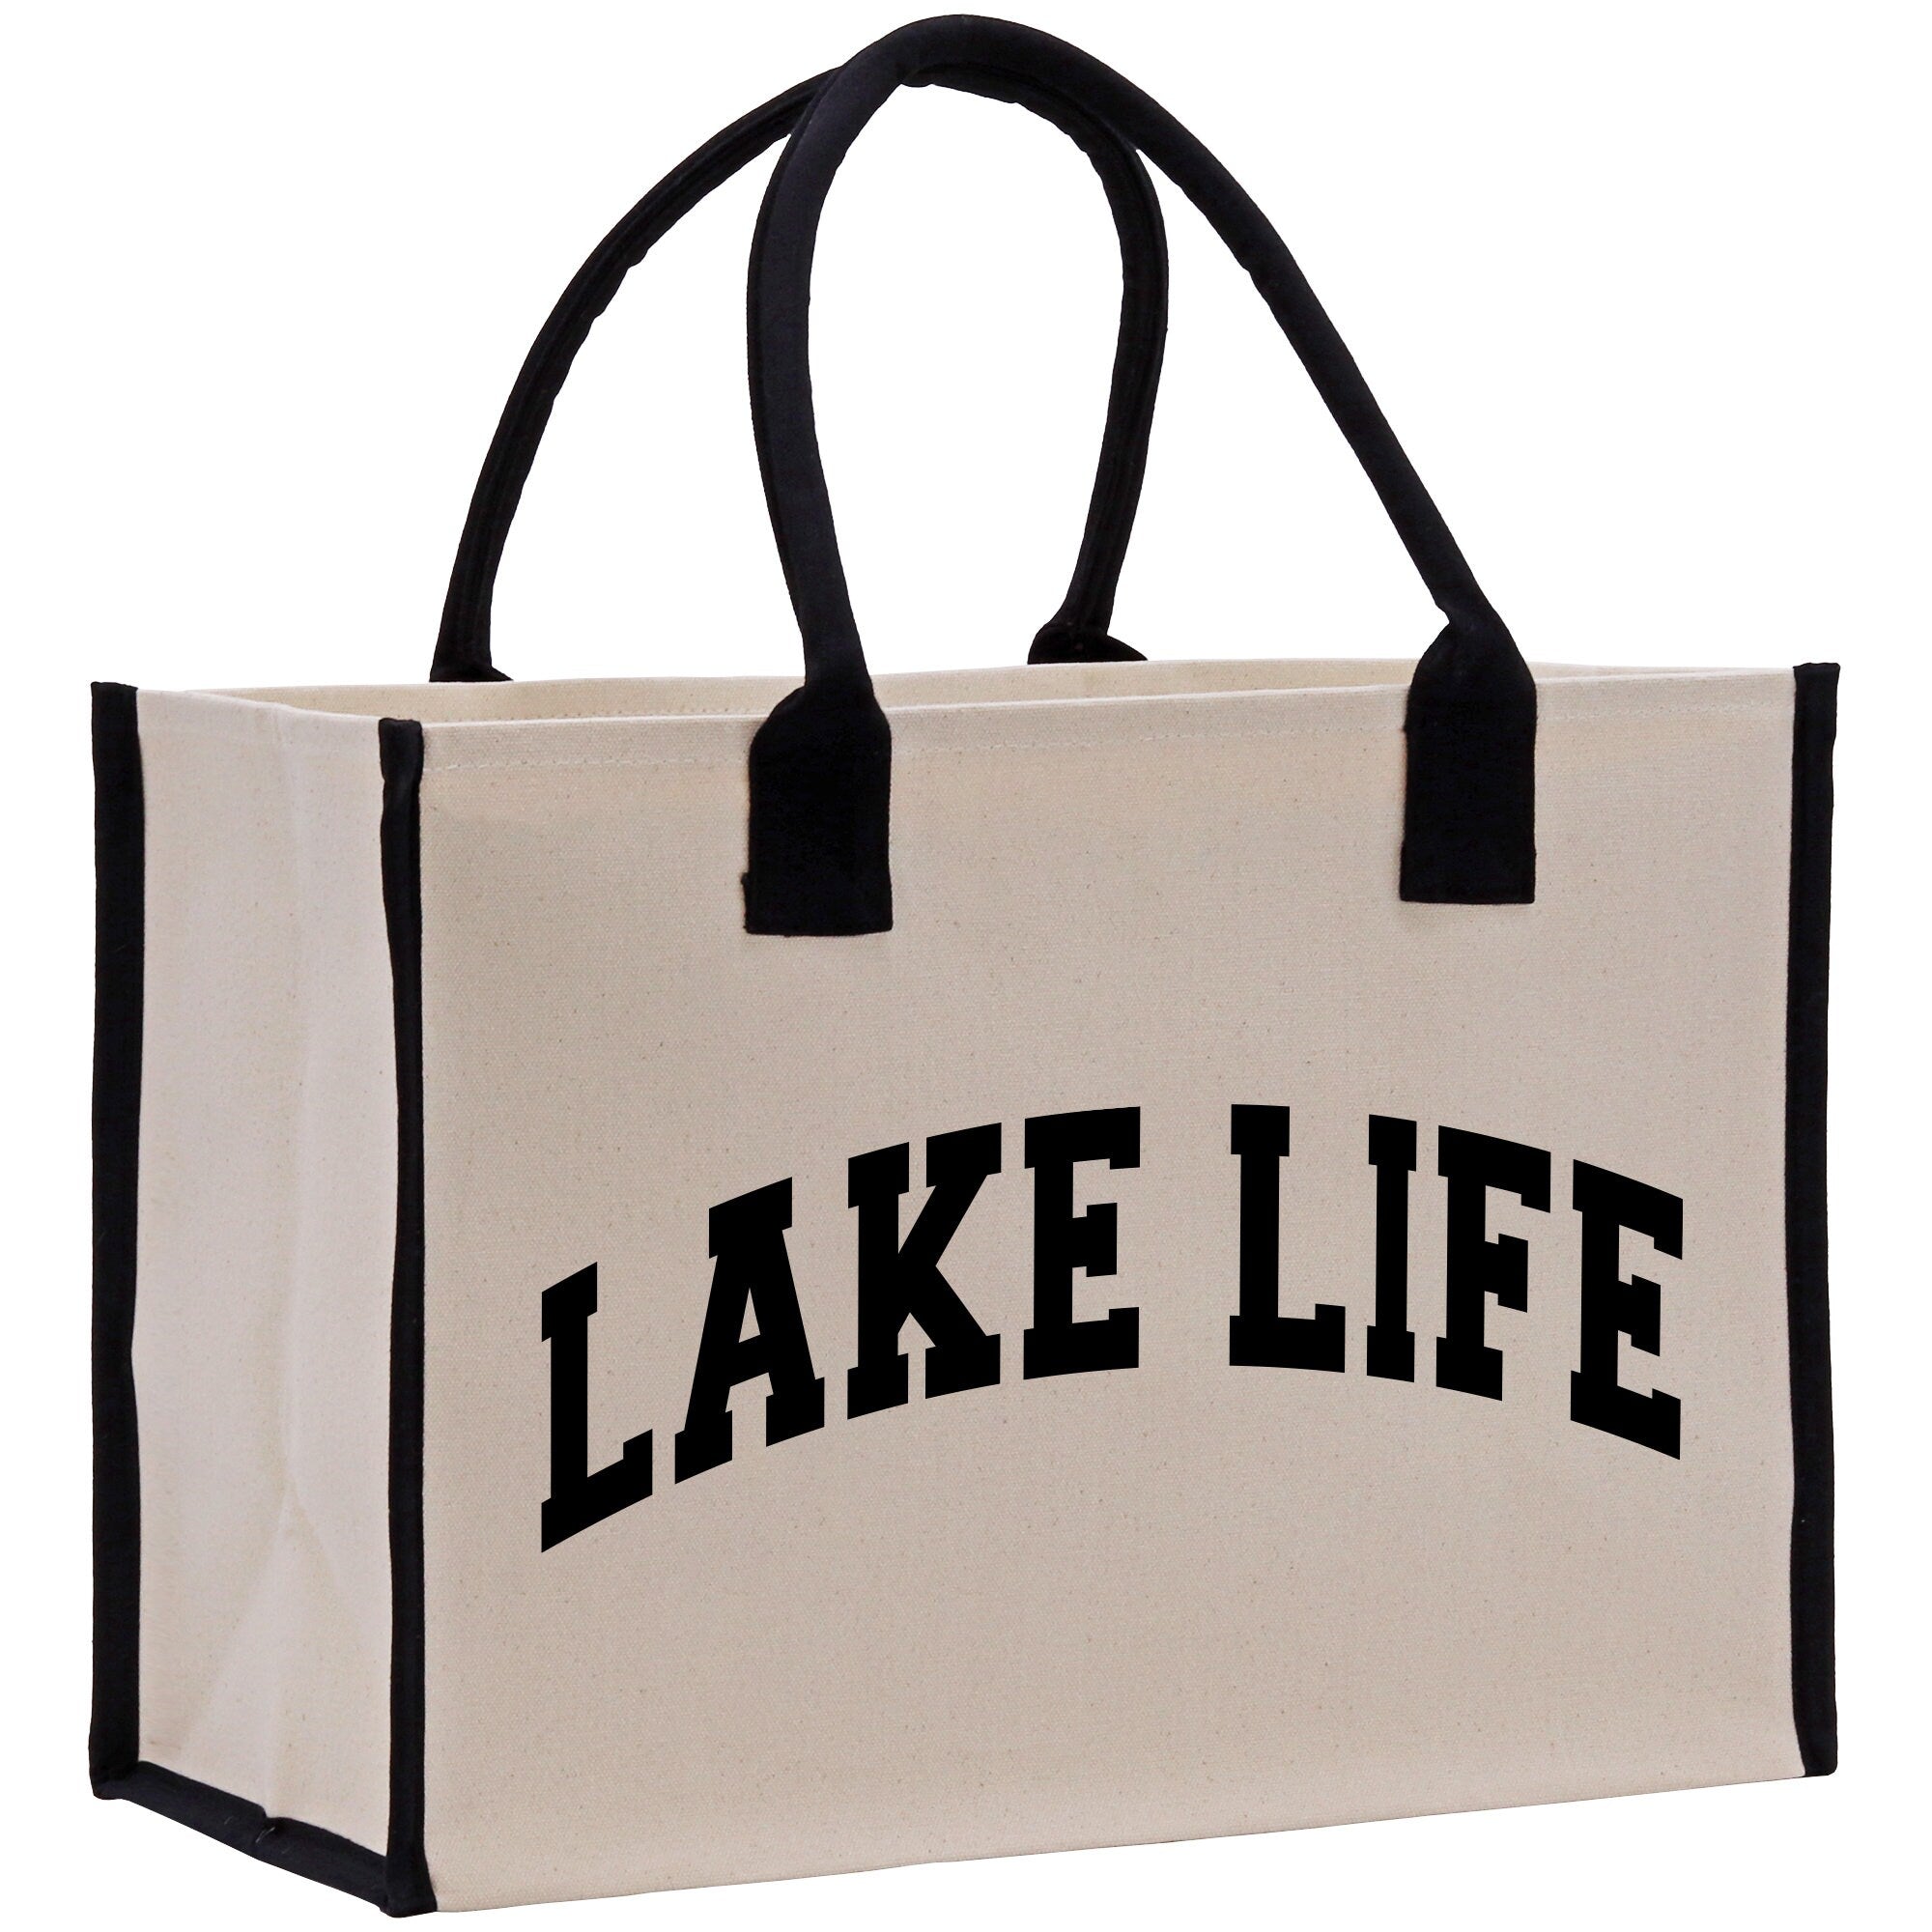 a white bag with black handles and a lake life logo on it